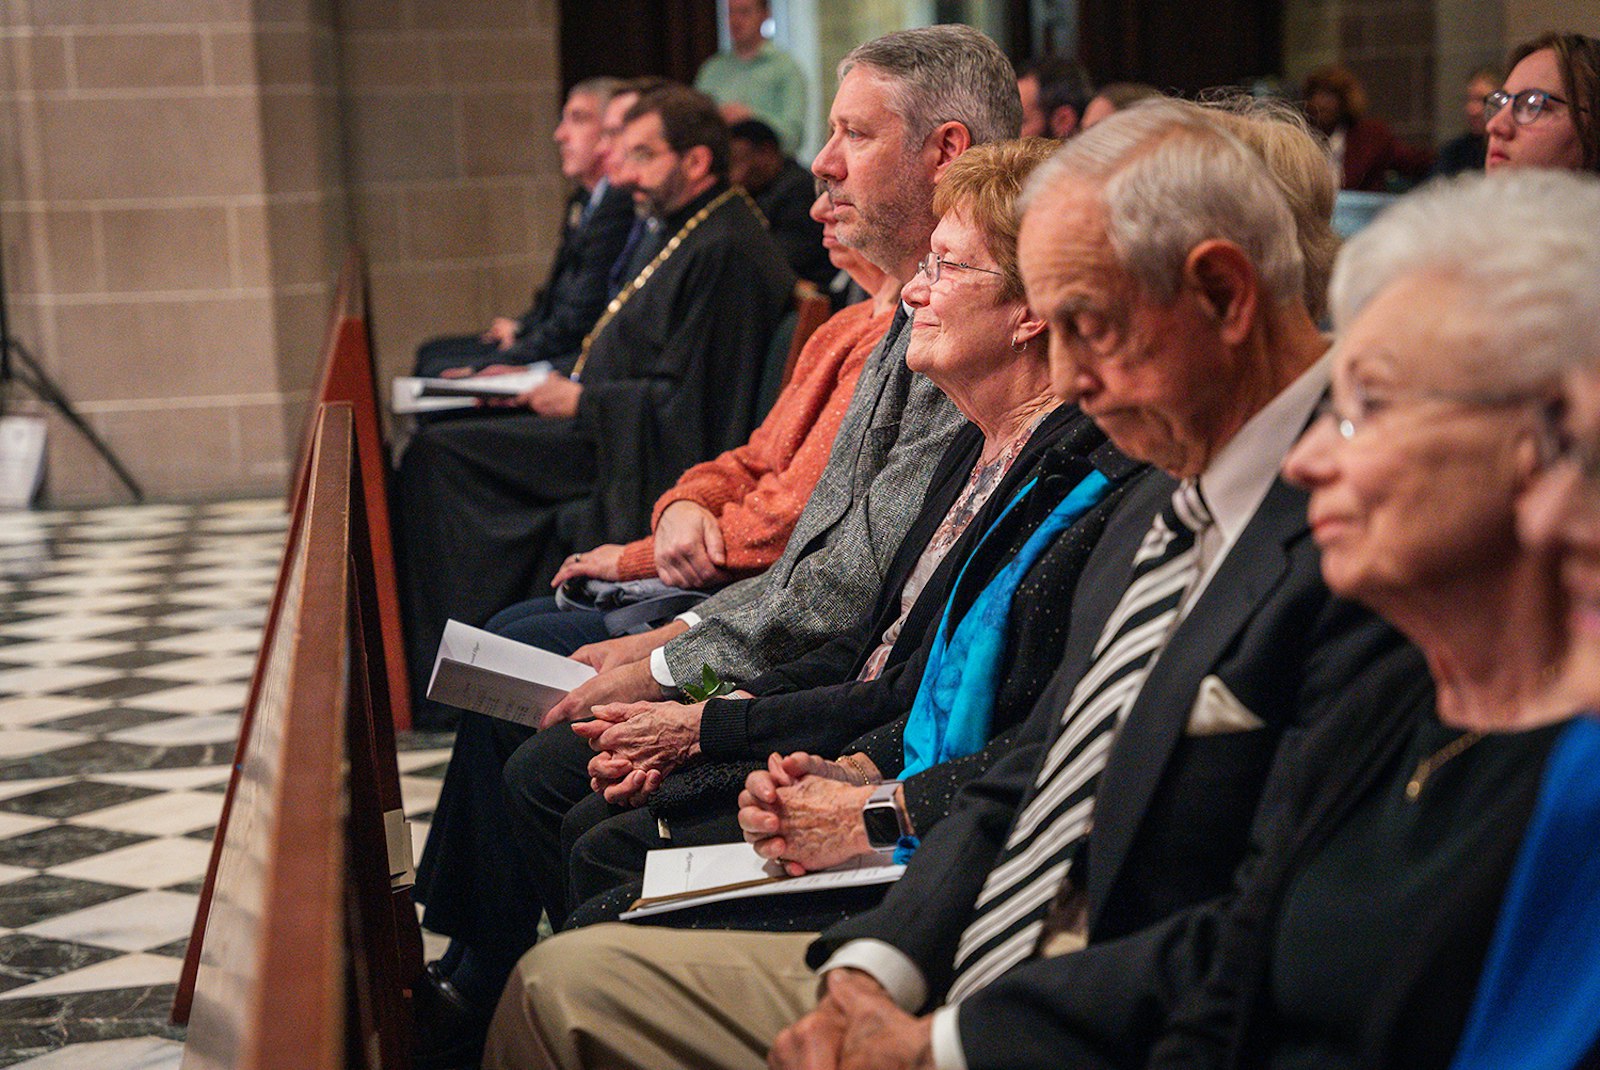 Bishop Monforton's family listens to his homily Nov. 7 during a Liturgy of Welcome and Inauguration of Ministry at the Cathedral of the Most Blessed Sacrament. (Valaurian Waller | Detroit Catholic)